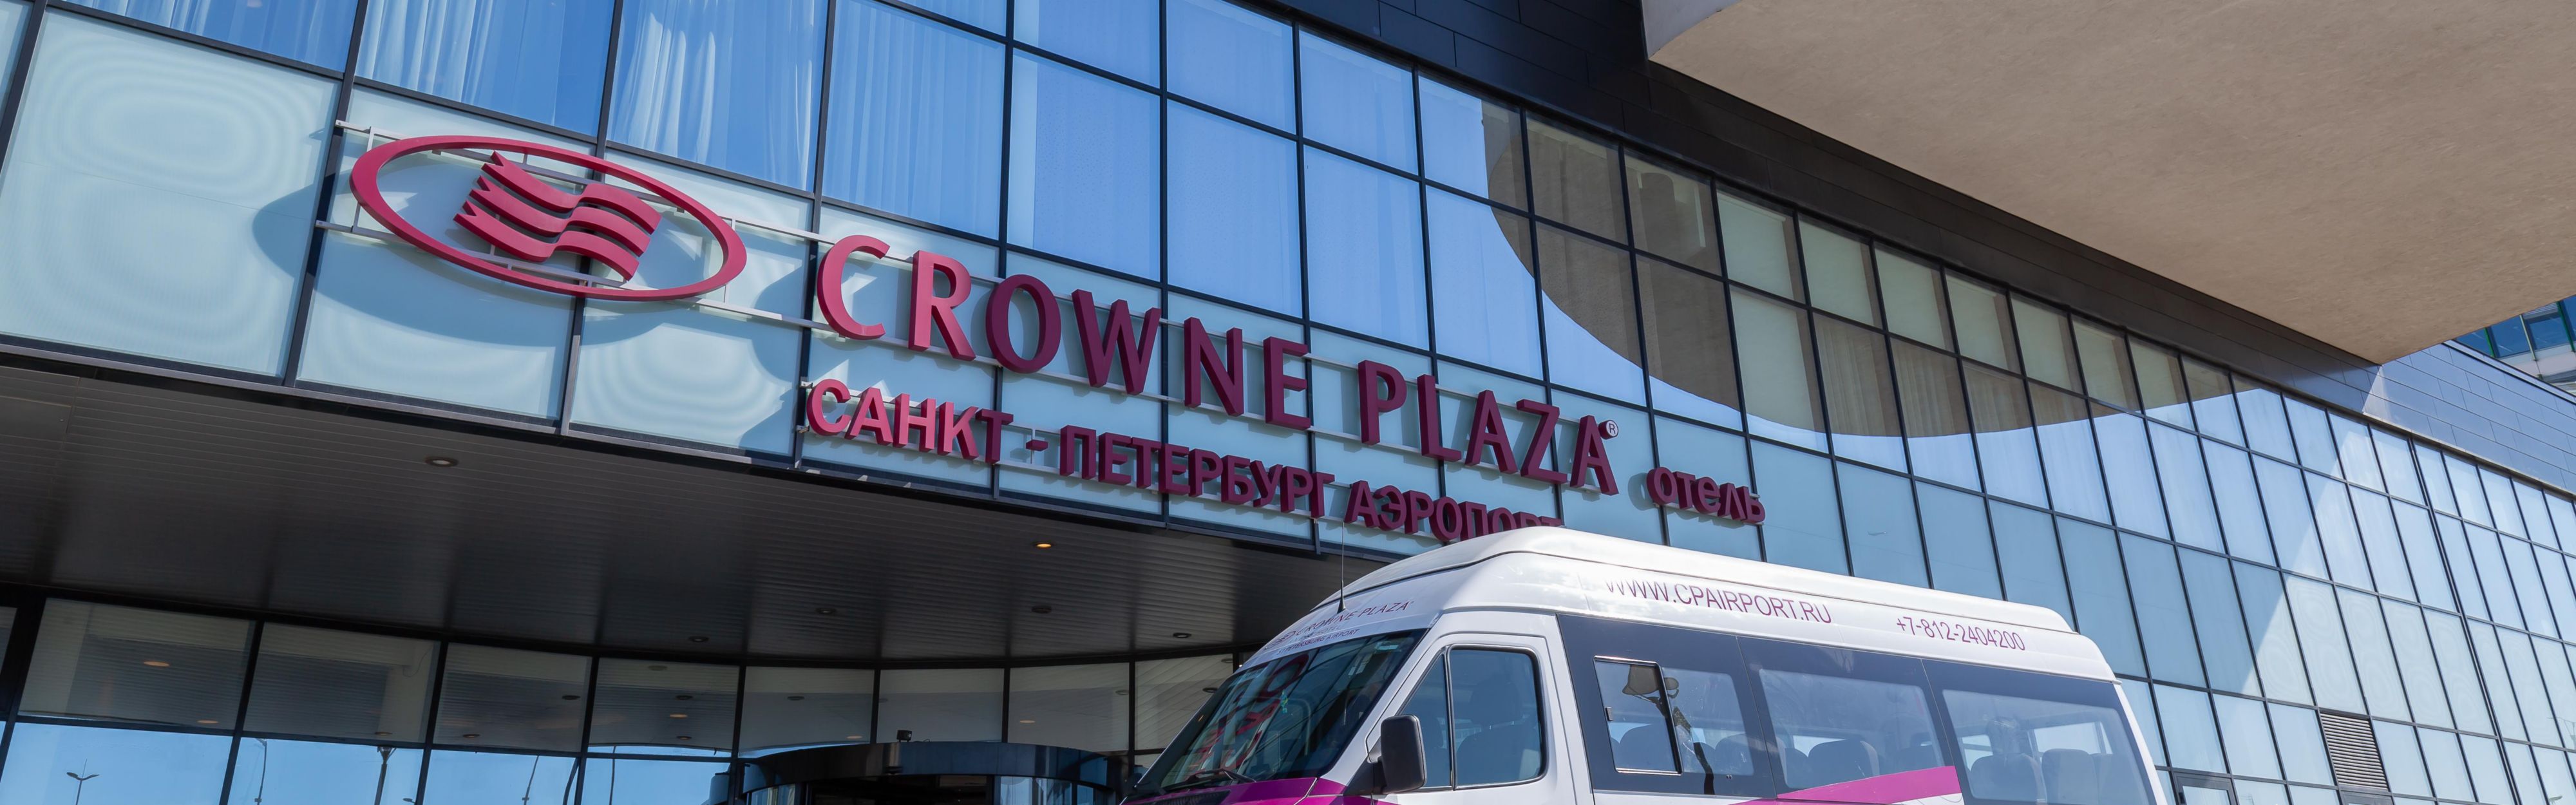 Crowne Plaza St. Petersburg Airport offers free shuttle to airport